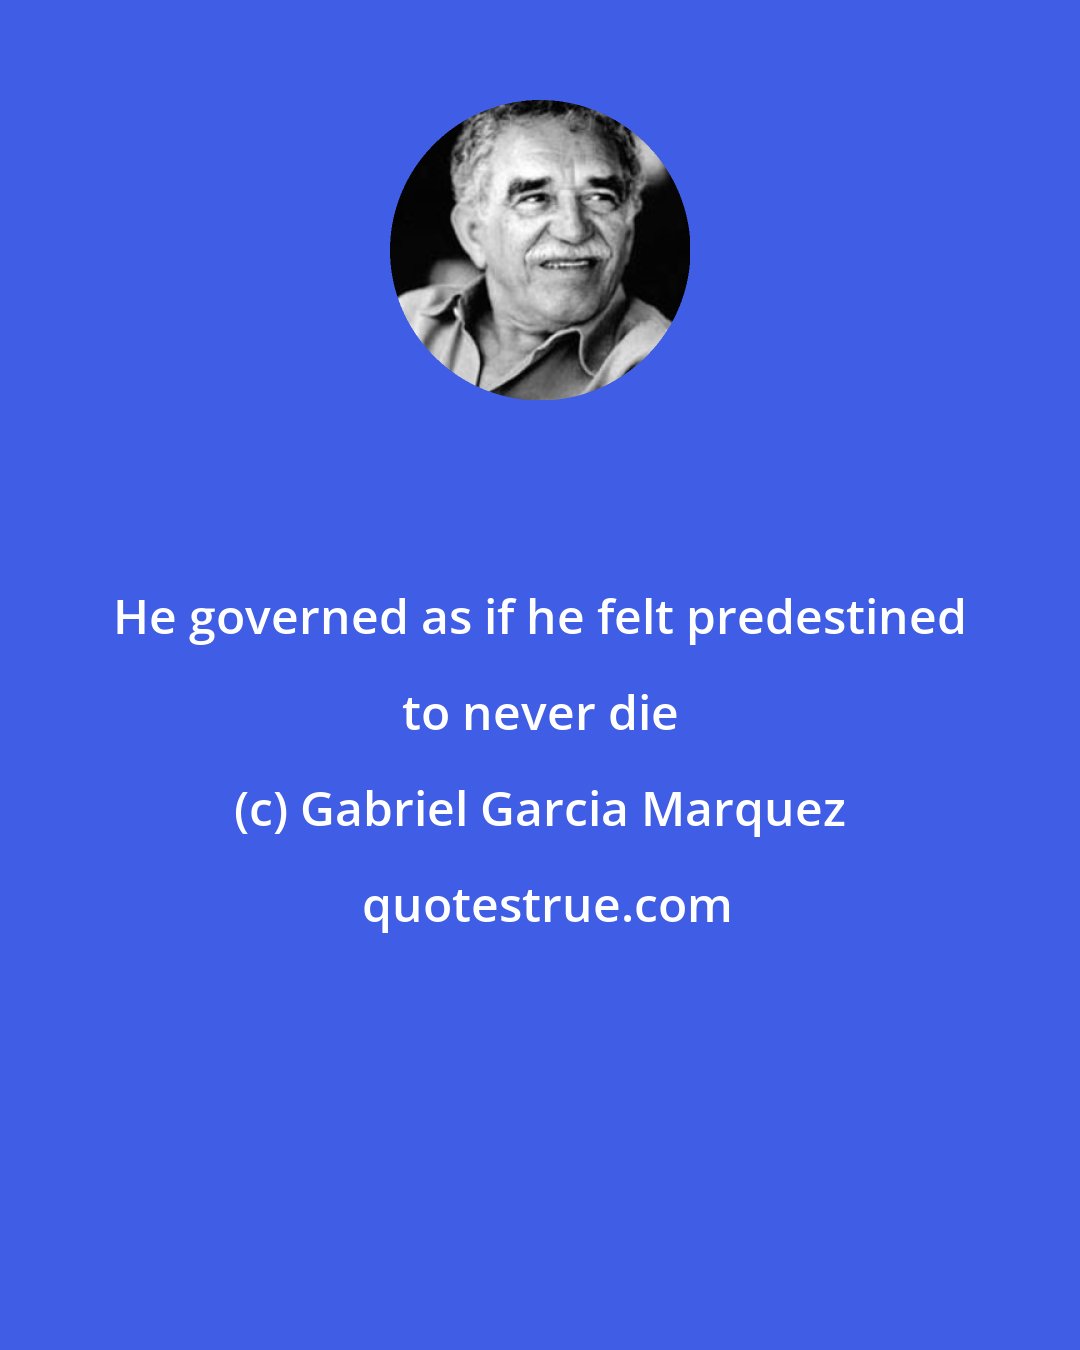 Gabriel Garcia Marquez: He governed as if he felt predestined to never die